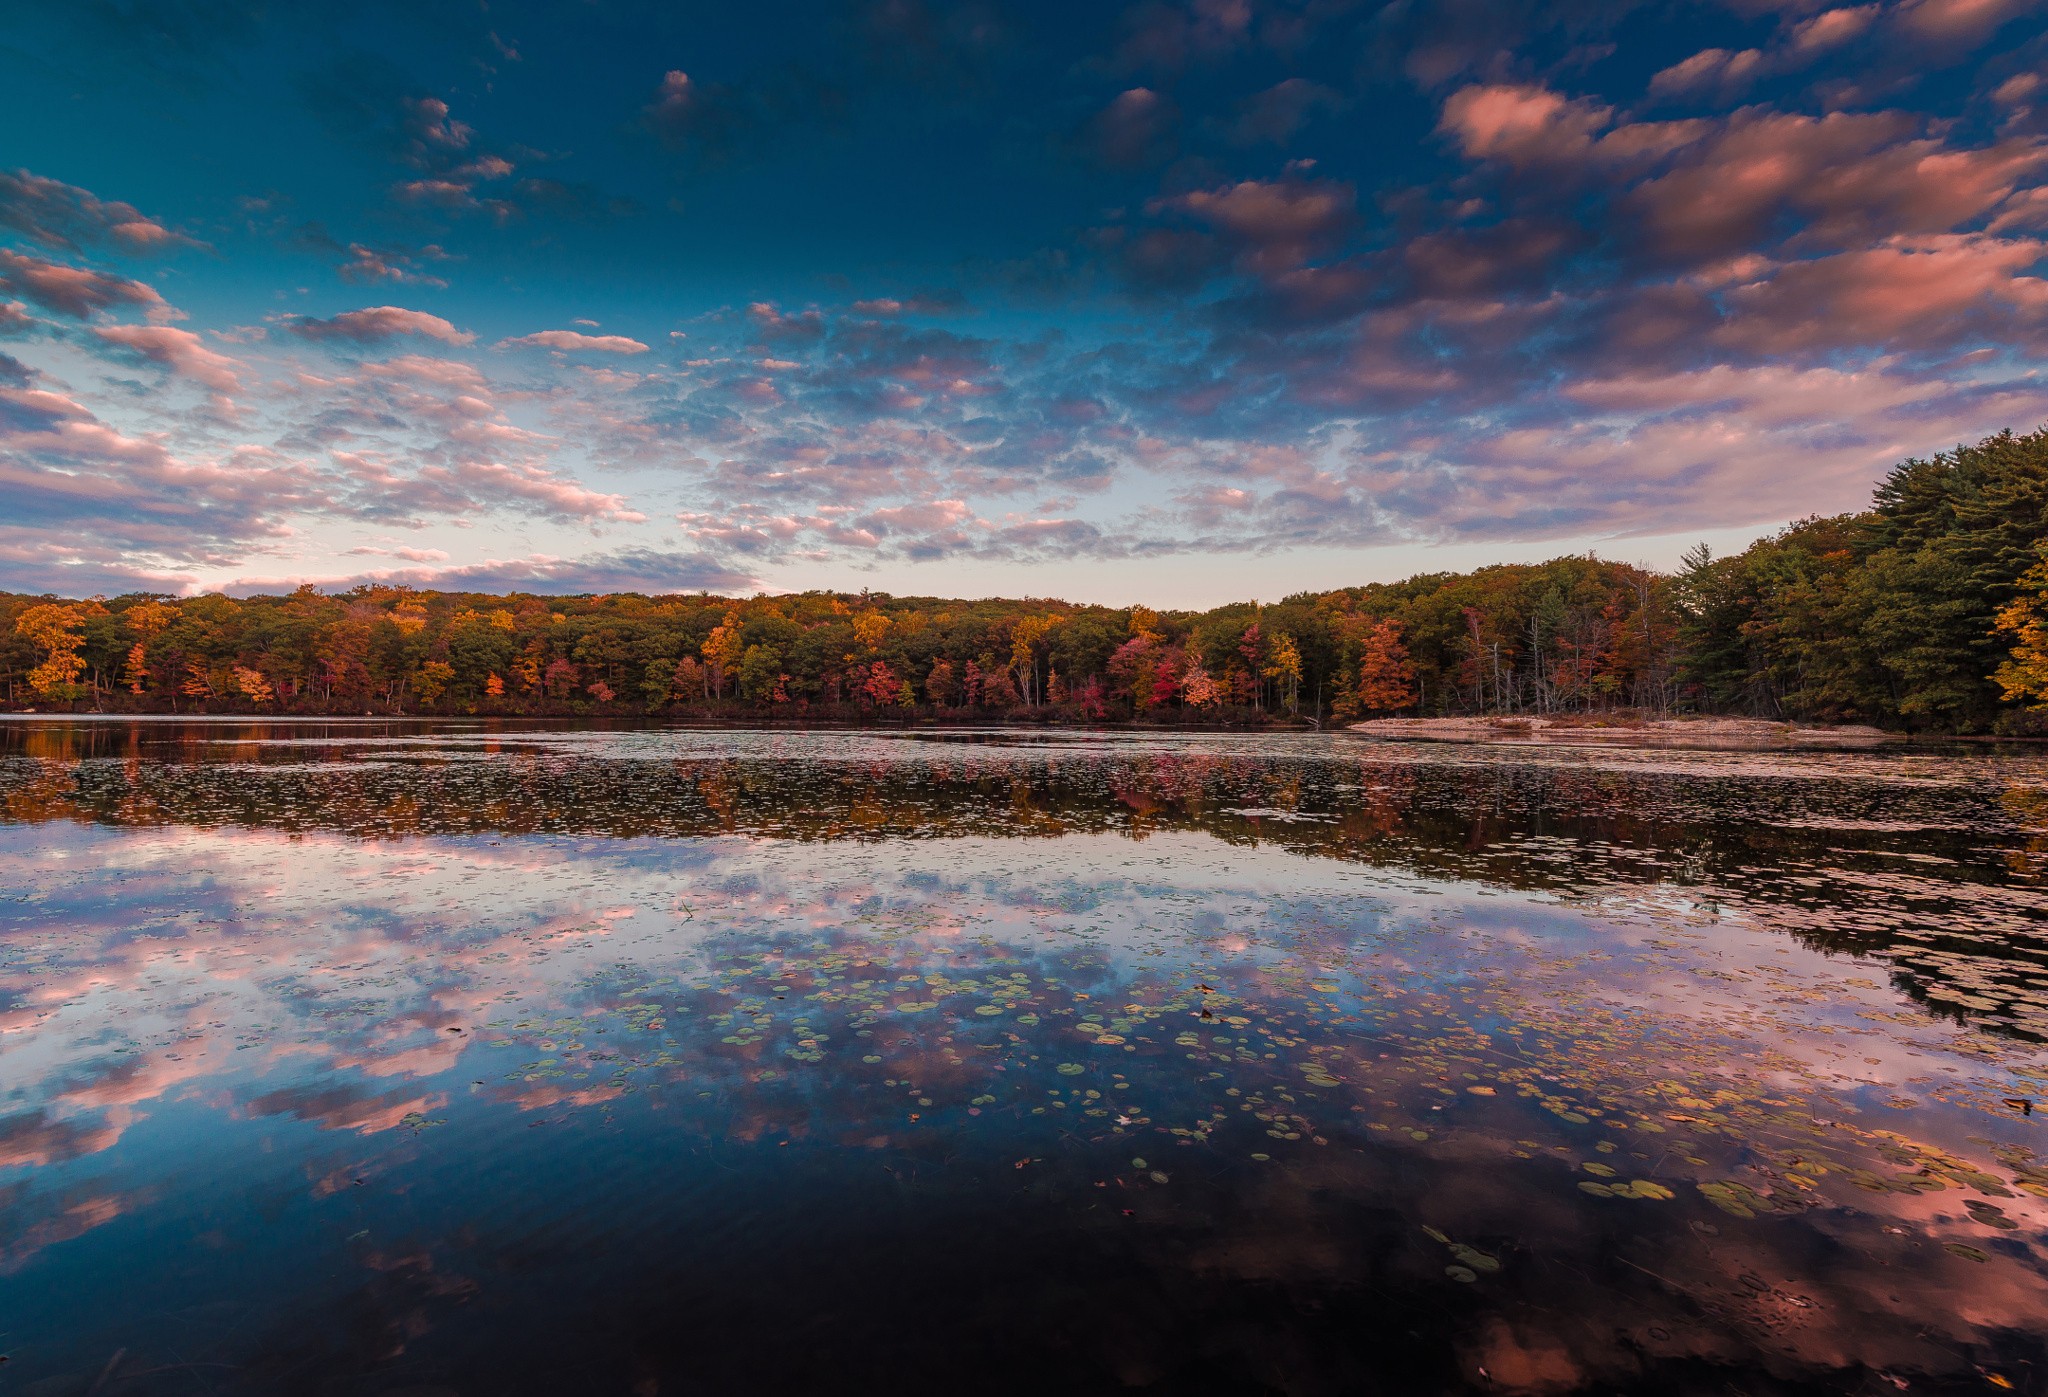 General 2048x1397 landscape lake forest fall red leaves nature water sky clouds trees